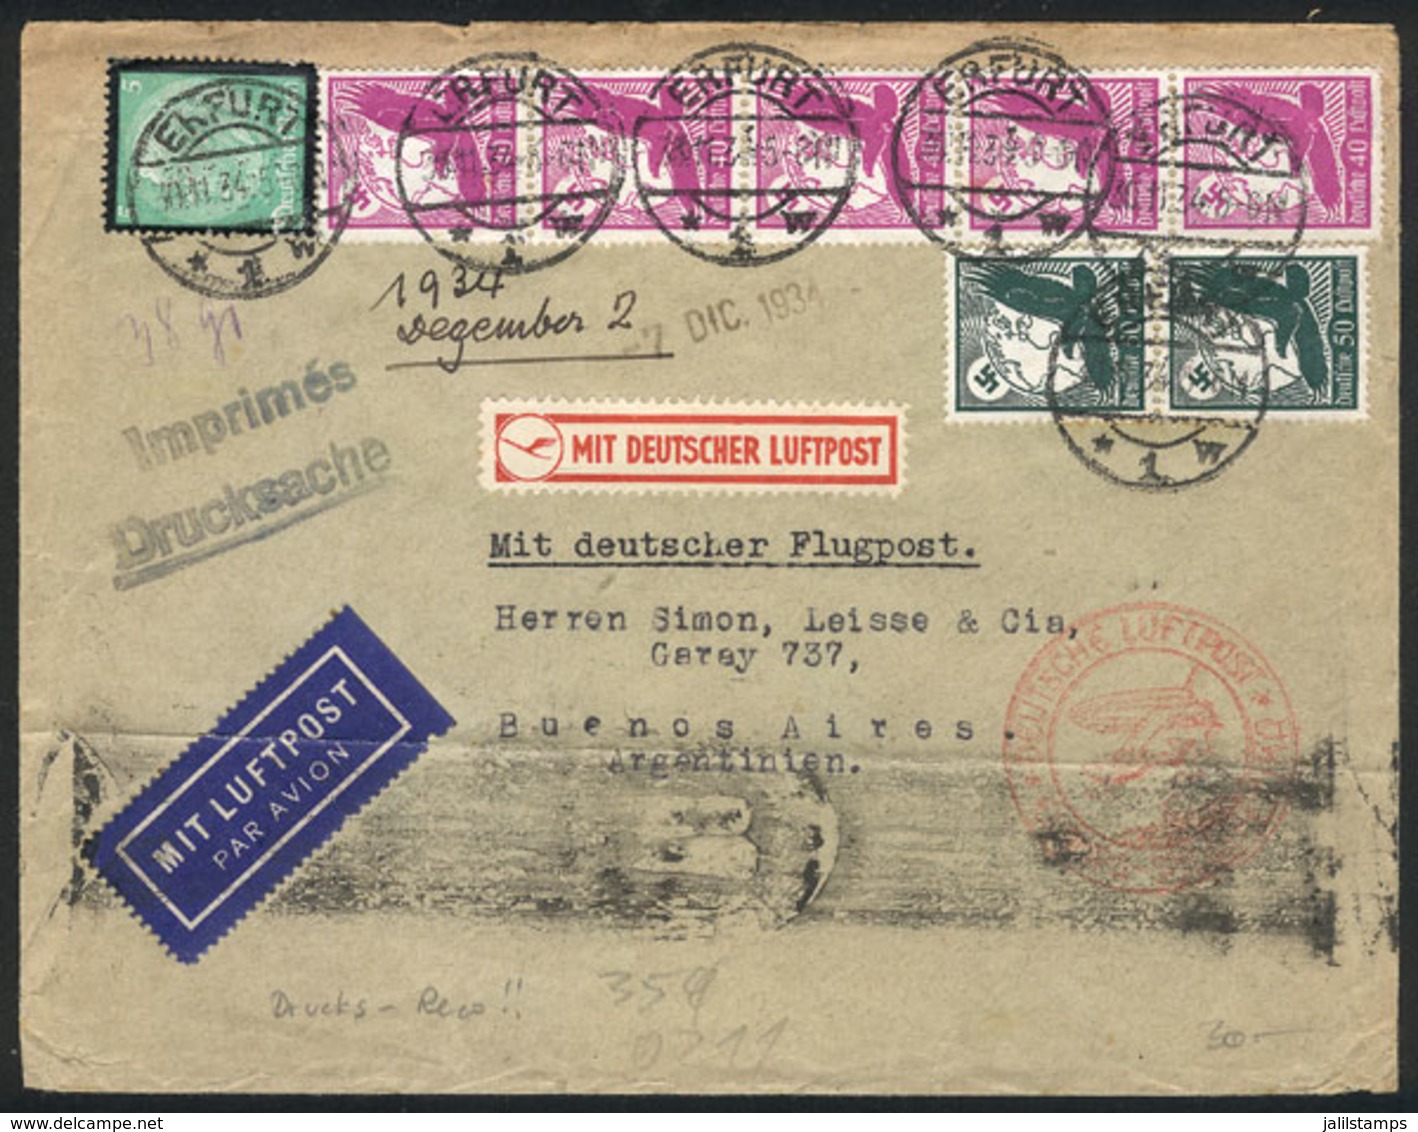 GERMANY: Airmail Cover (it Contained Printed Matter) Sent From Erfurt To Buenos Aires On 30/NO/1934 Franked With 3.05Mk. - Prefilatelia